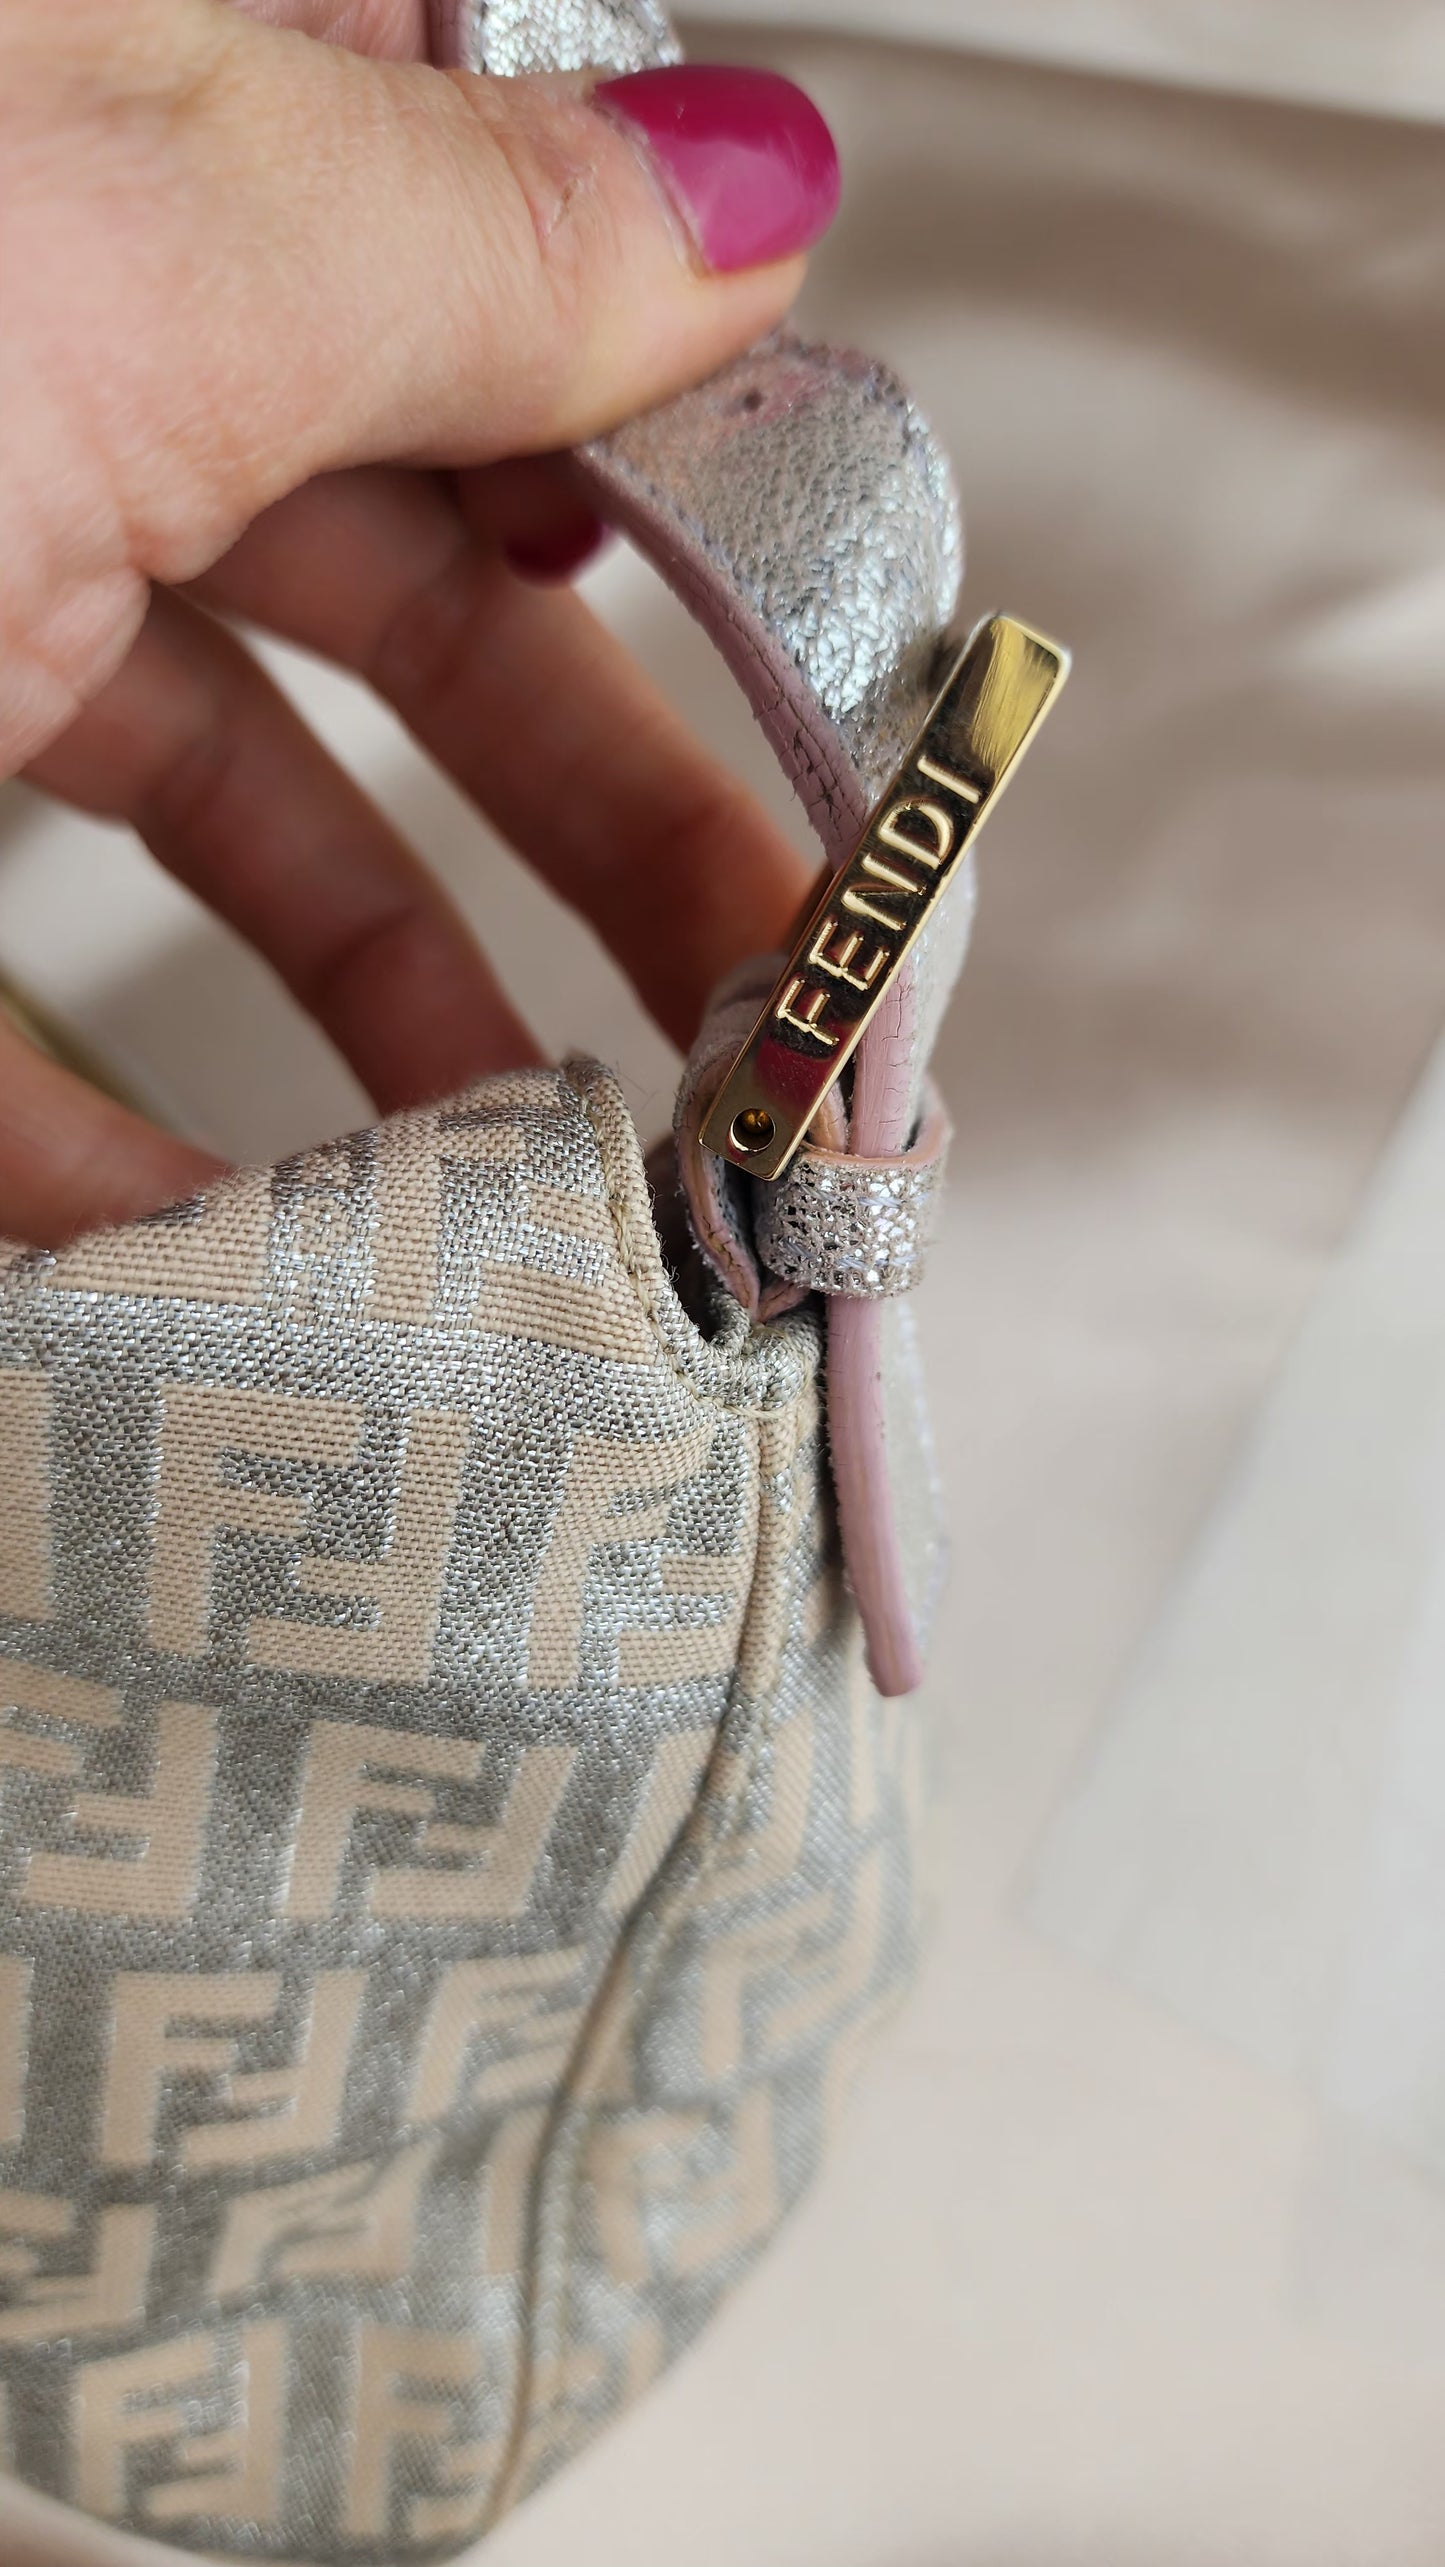 Fendi Zucchino Print Silver and Pink Baguette